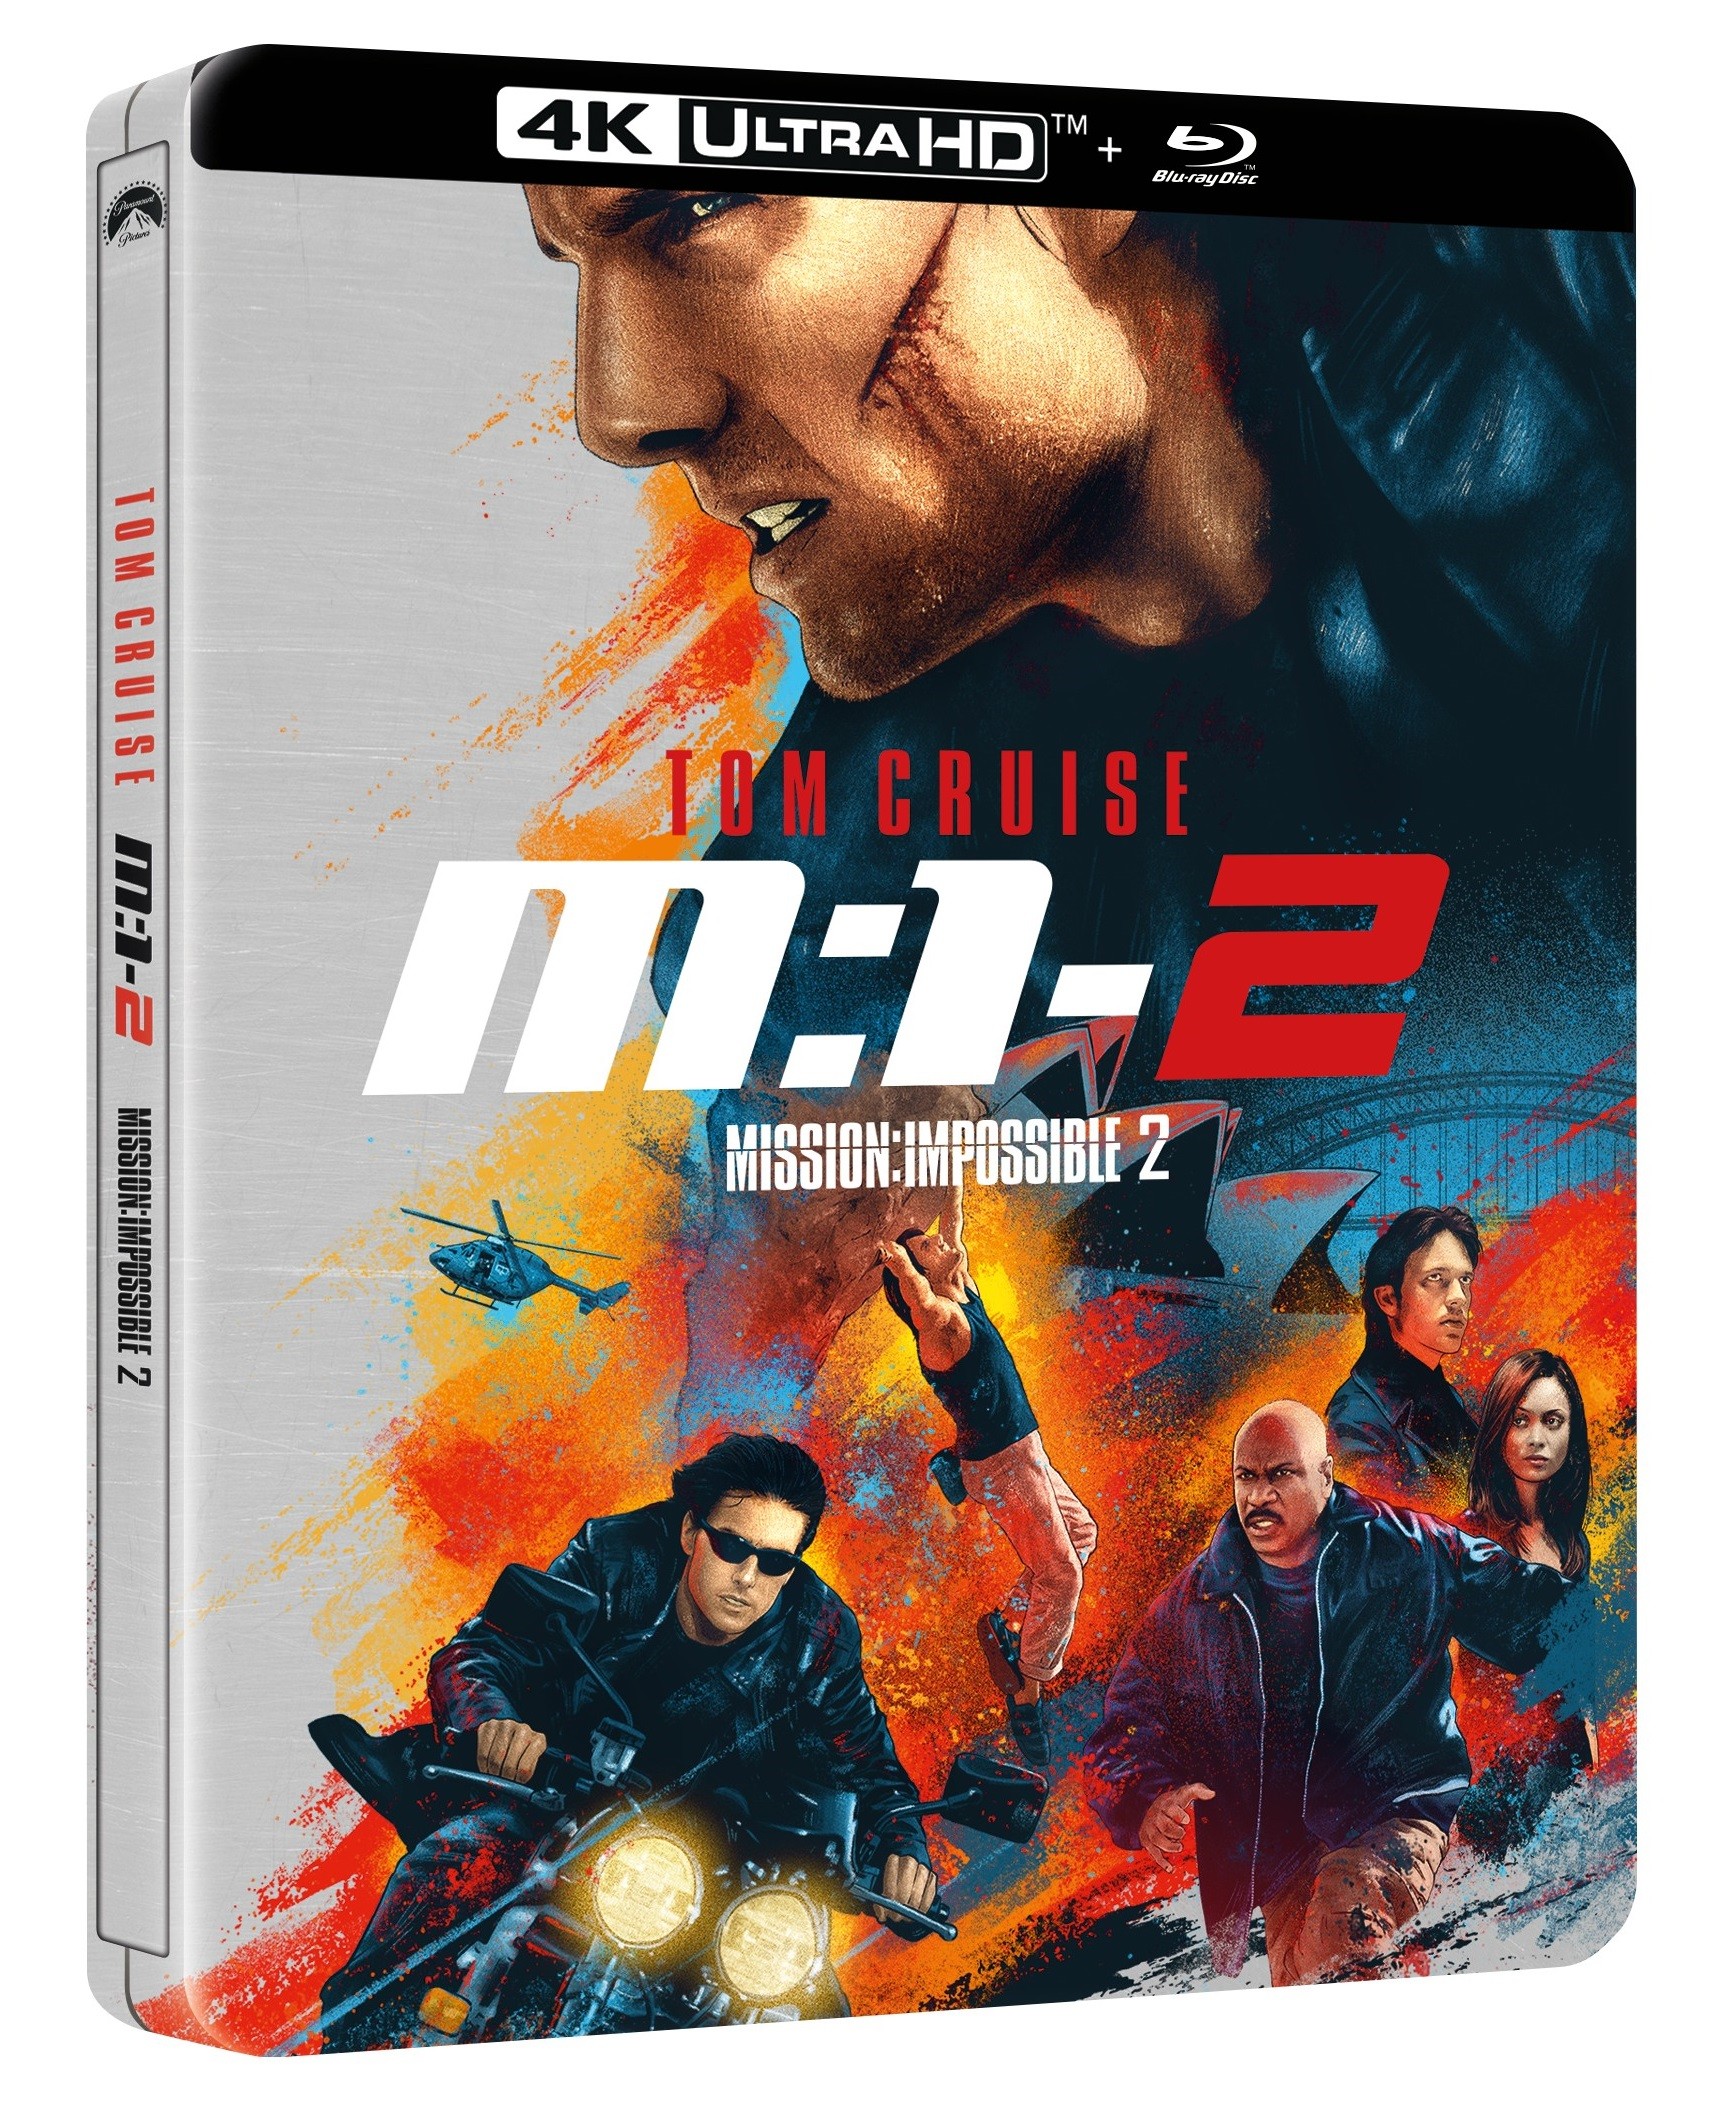 MISSION IMPOSSIBLE 2 - COMBO UHD 4K + BD - STEELBOOK - EDITION LIMITEE